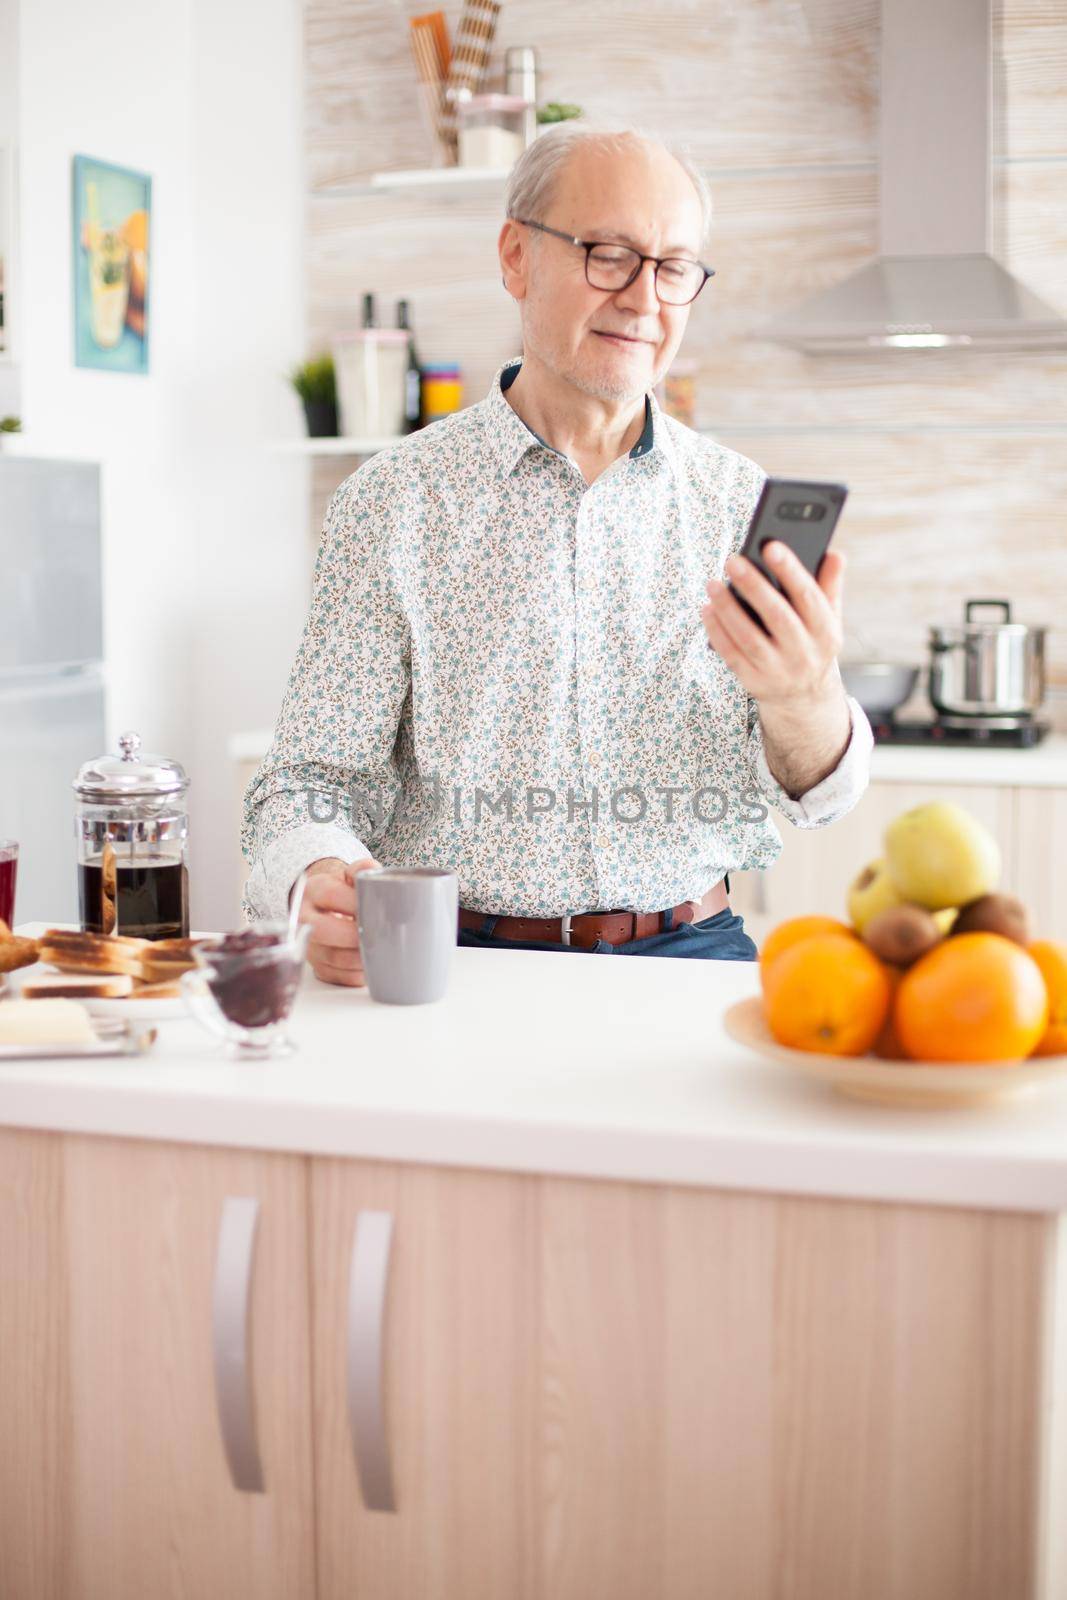 Retired old man watching video watching video on smartphone in kitchen while having breakfast. Using modern technology while enjoying morning coffee during breakfast. Authentic portrait of retired senior internet online technology